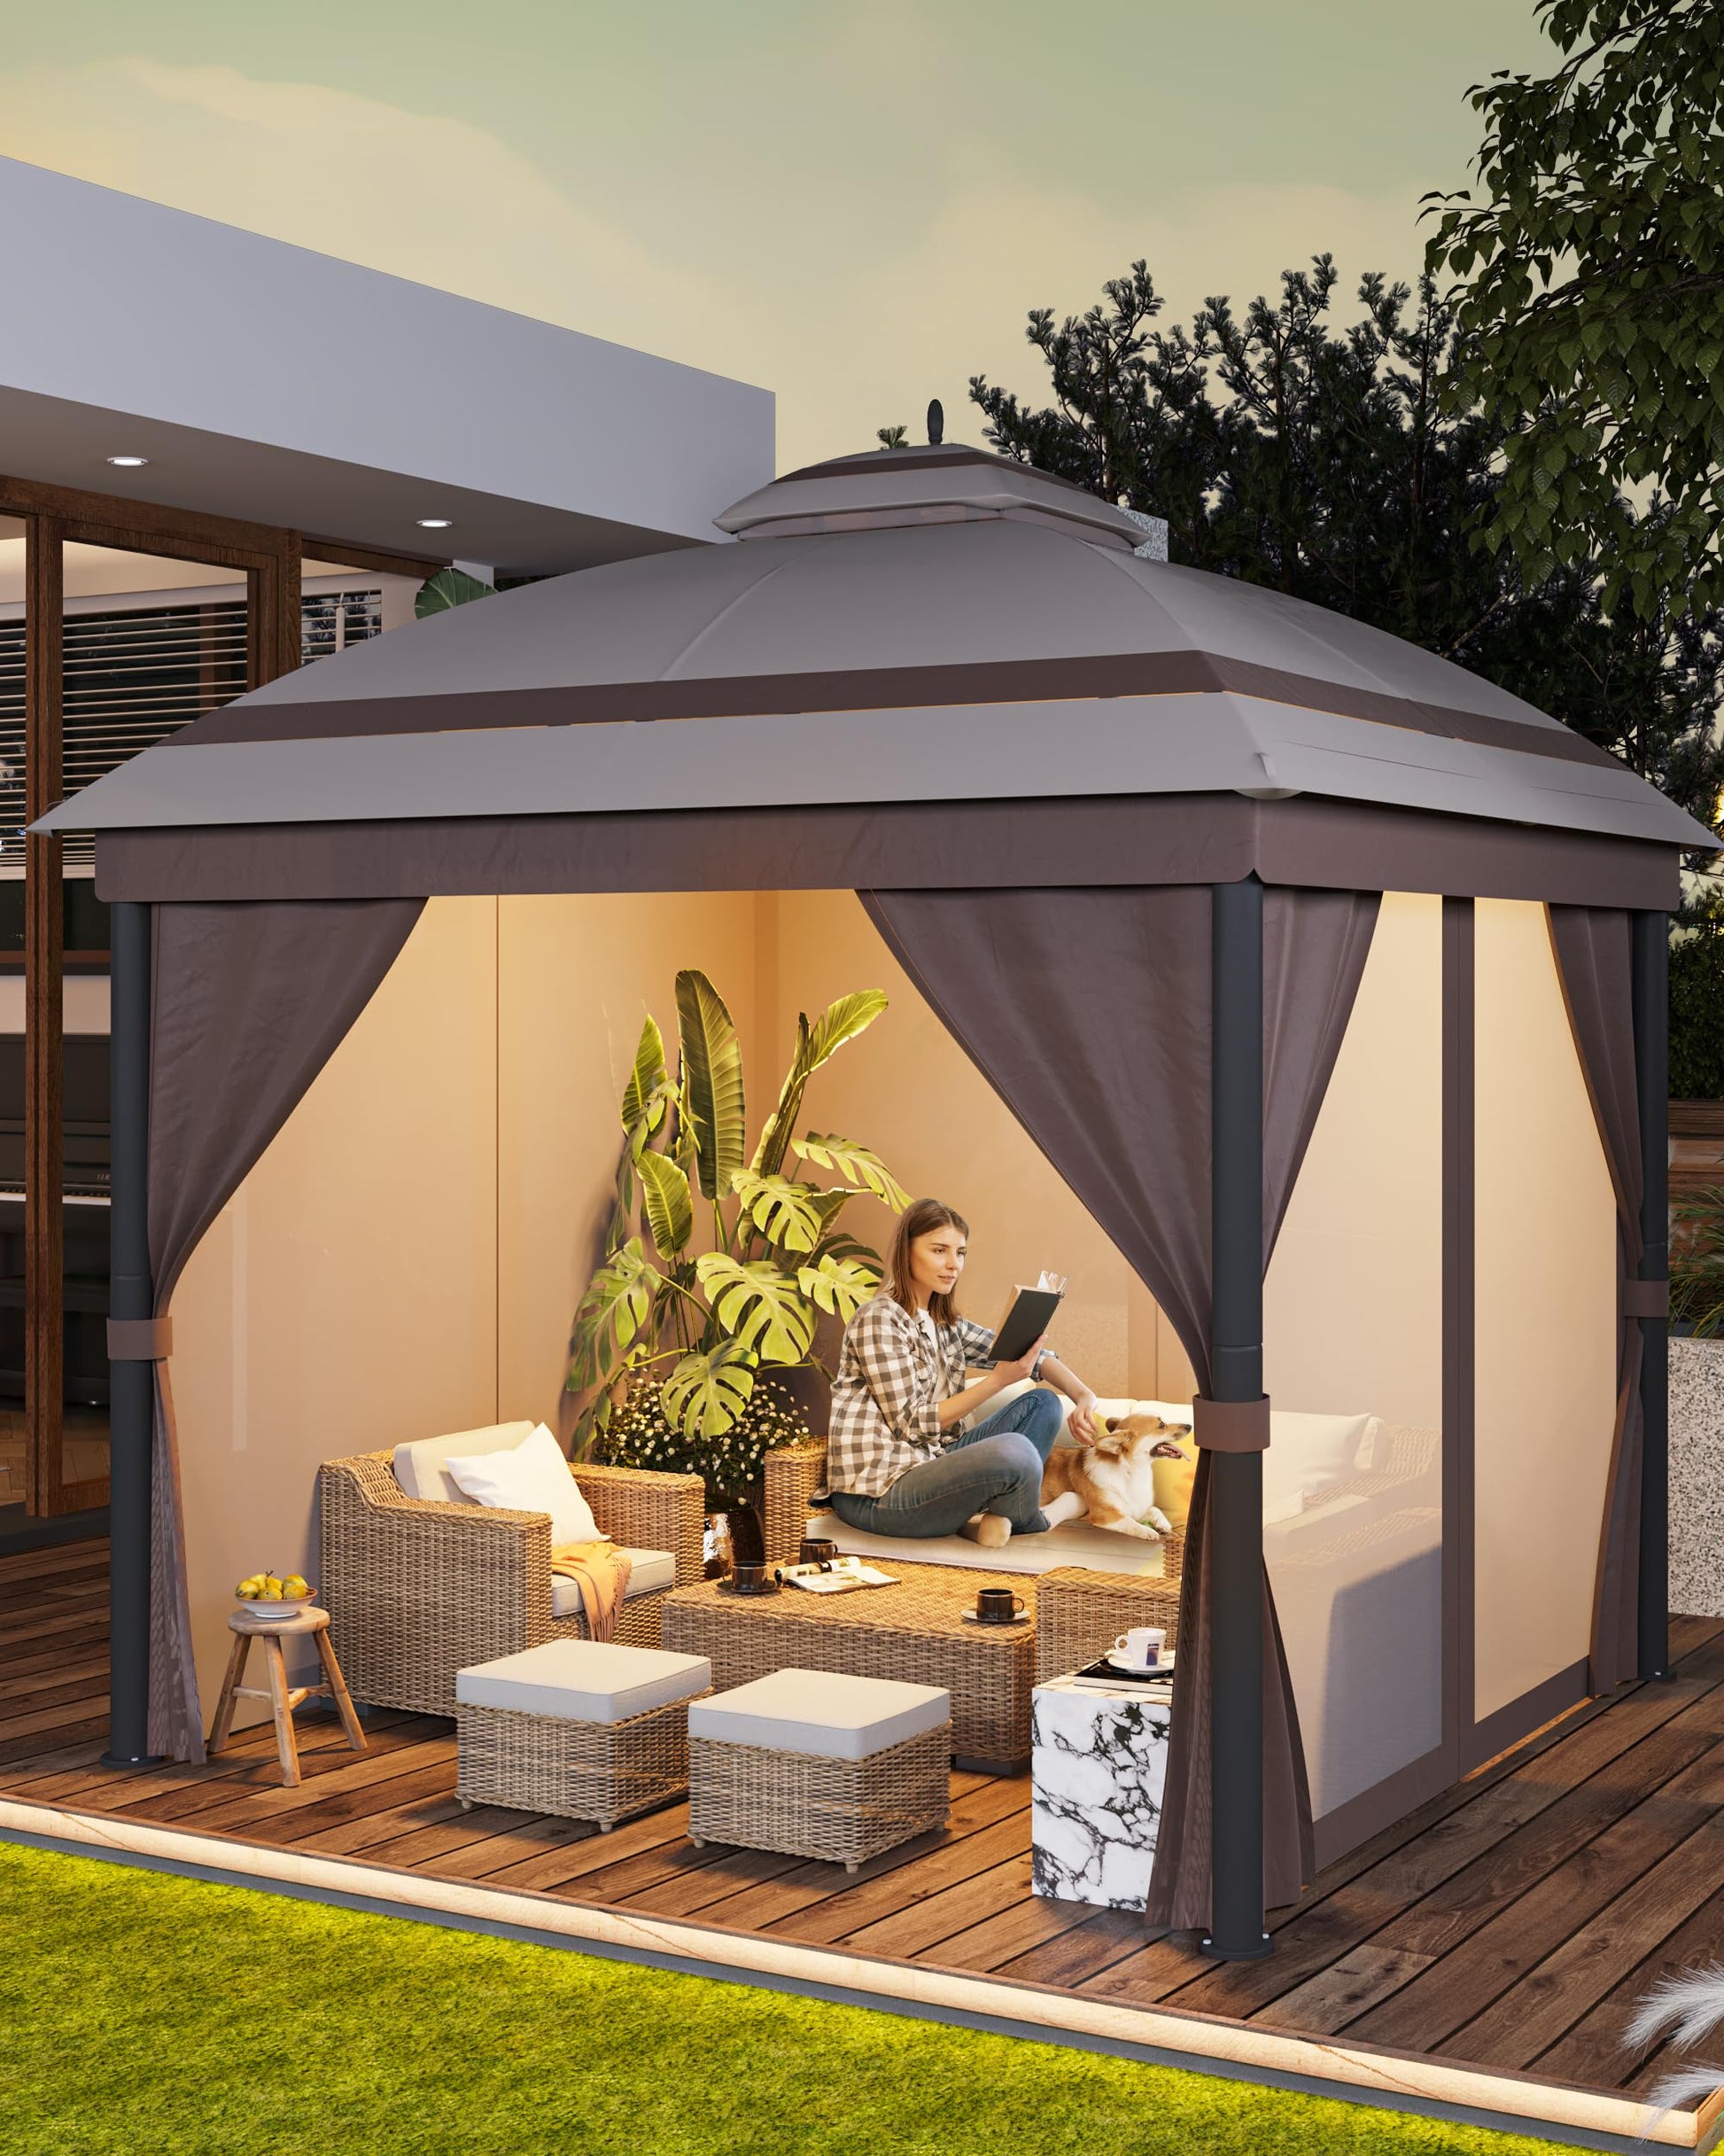 12dtx12ft Outdoor Gazebo, with Roof Reinforcing Bars, Curtains Nettings, and Double Roof, Parties Gazebo for Backyard, Garden, Patio, Lawns, and Deck